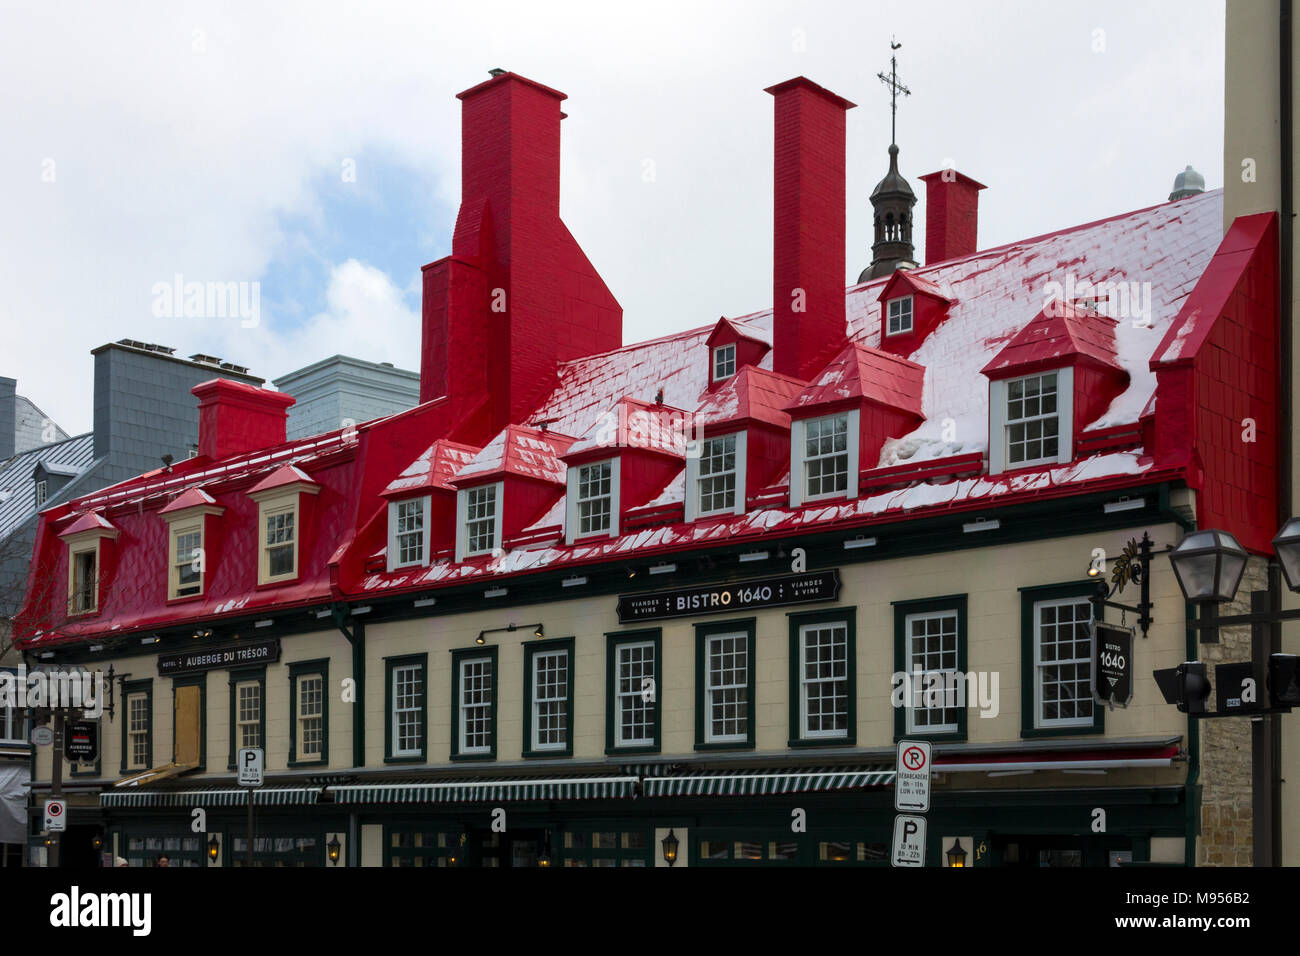 Bistro 1640, example of French architecture, with elaborate red roof in Quebec City, Quebec, Canada Stock Photo